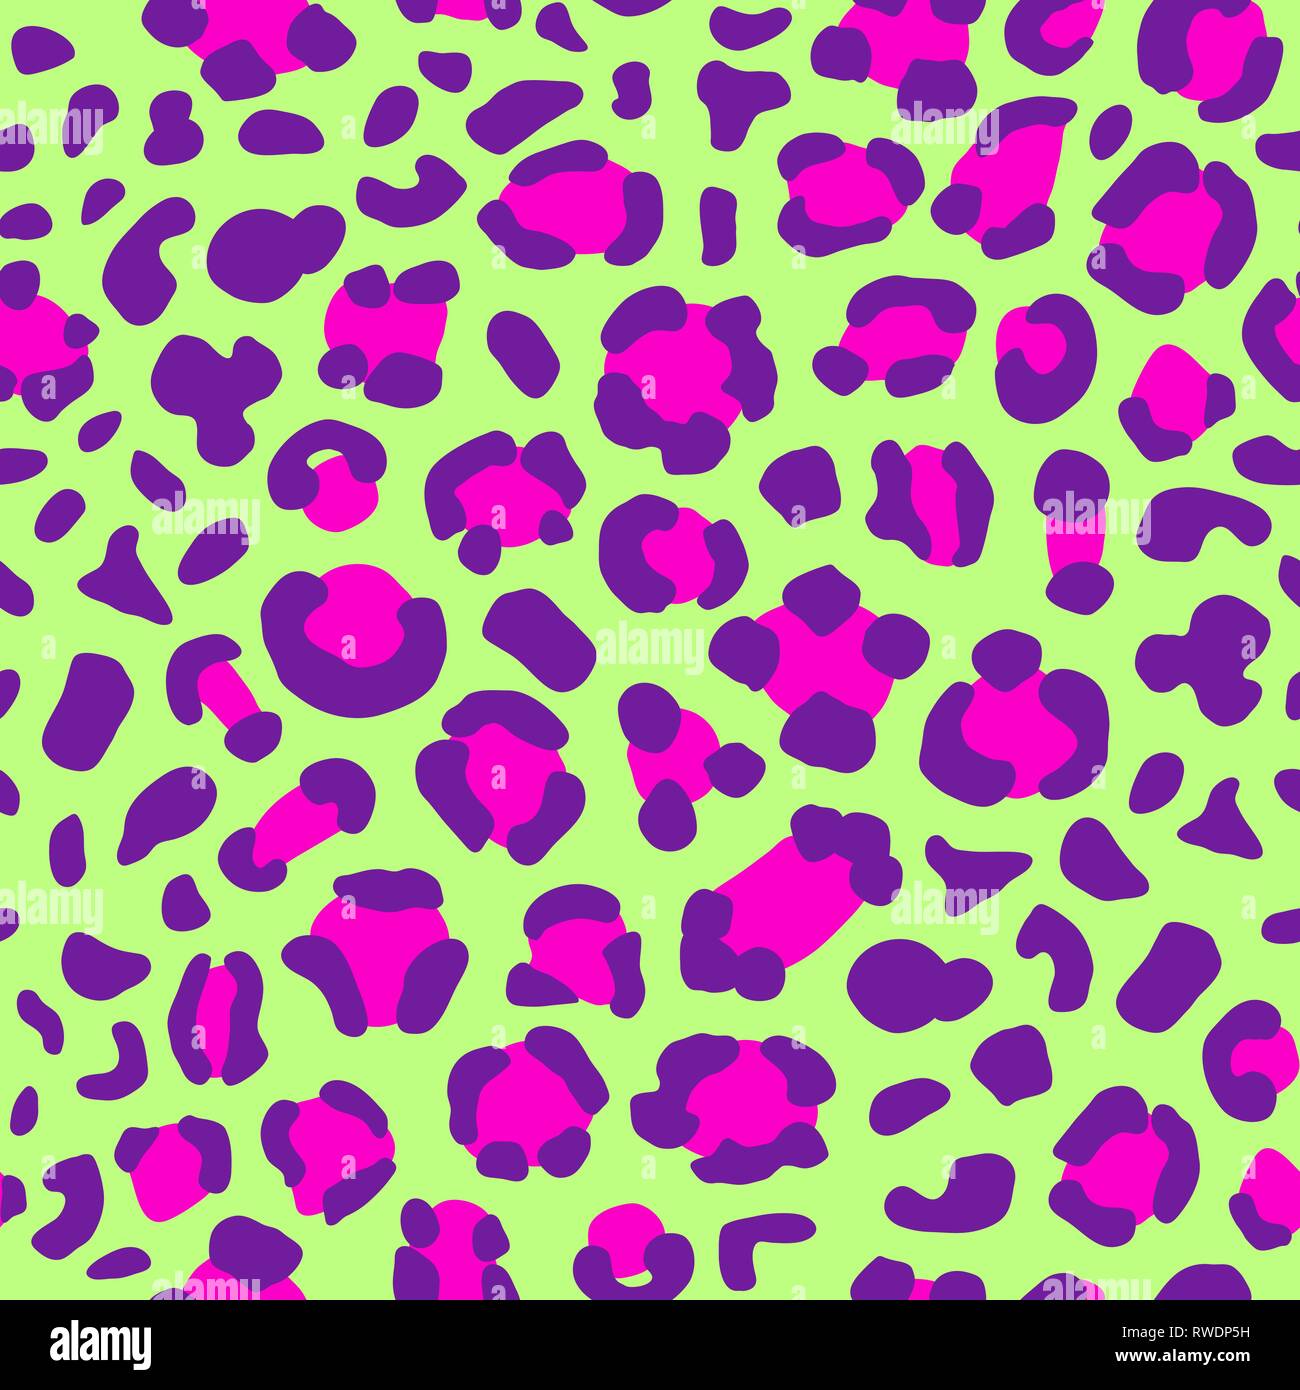 Leopard Stock Vector Images - Alamy